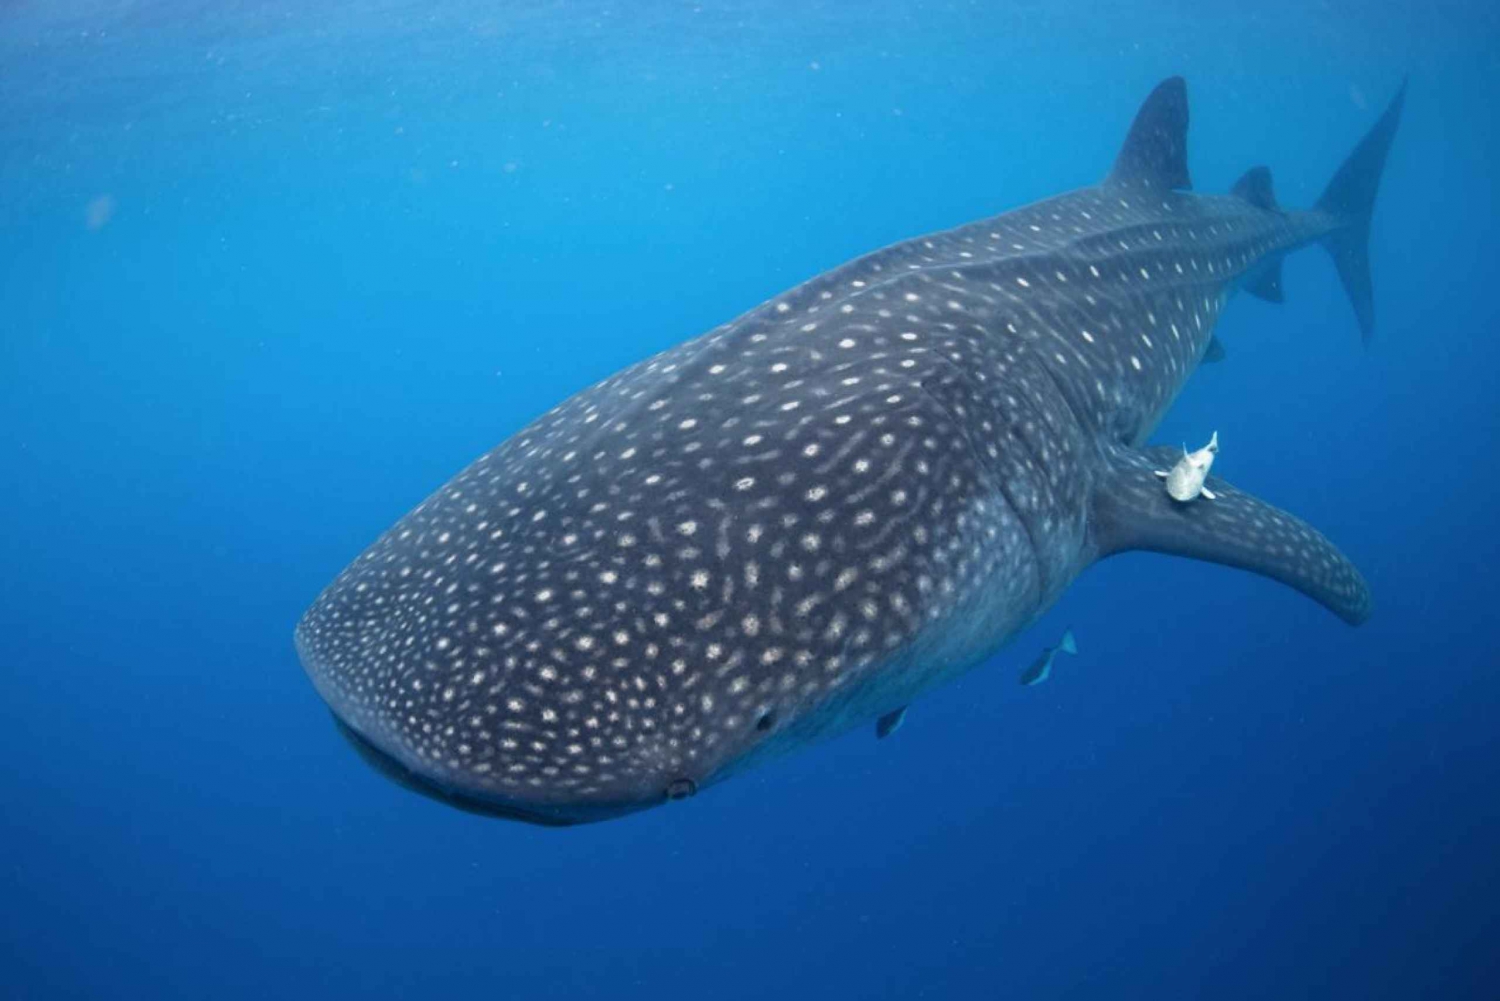 From Cabo: Snorkel with Whale Sharks in La Paz